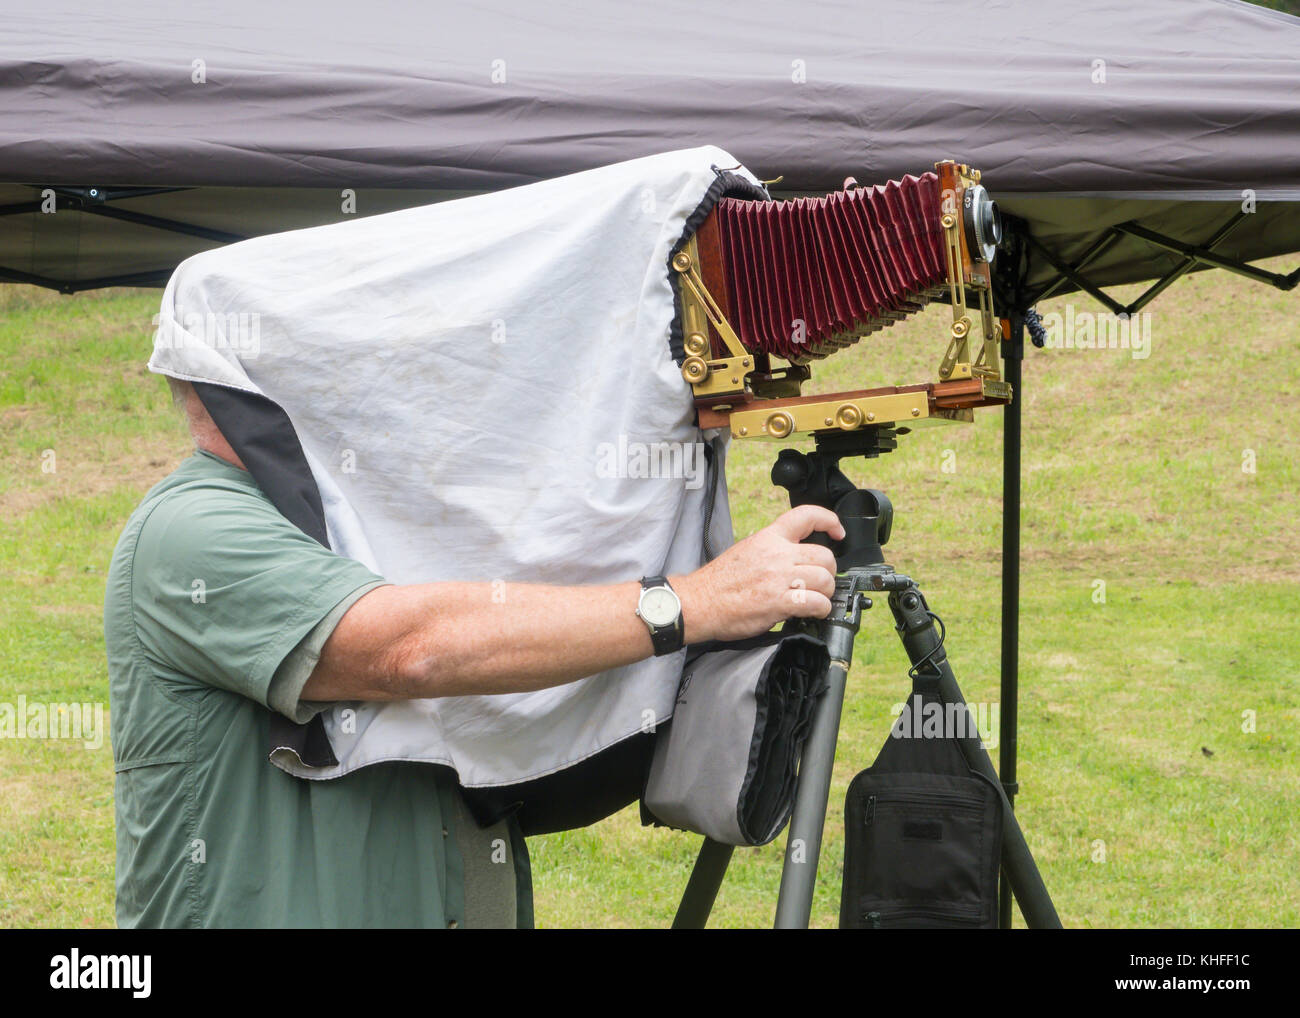 Photographer under the camera hood while taking photograph using a 4x5 view camera Stock Photo